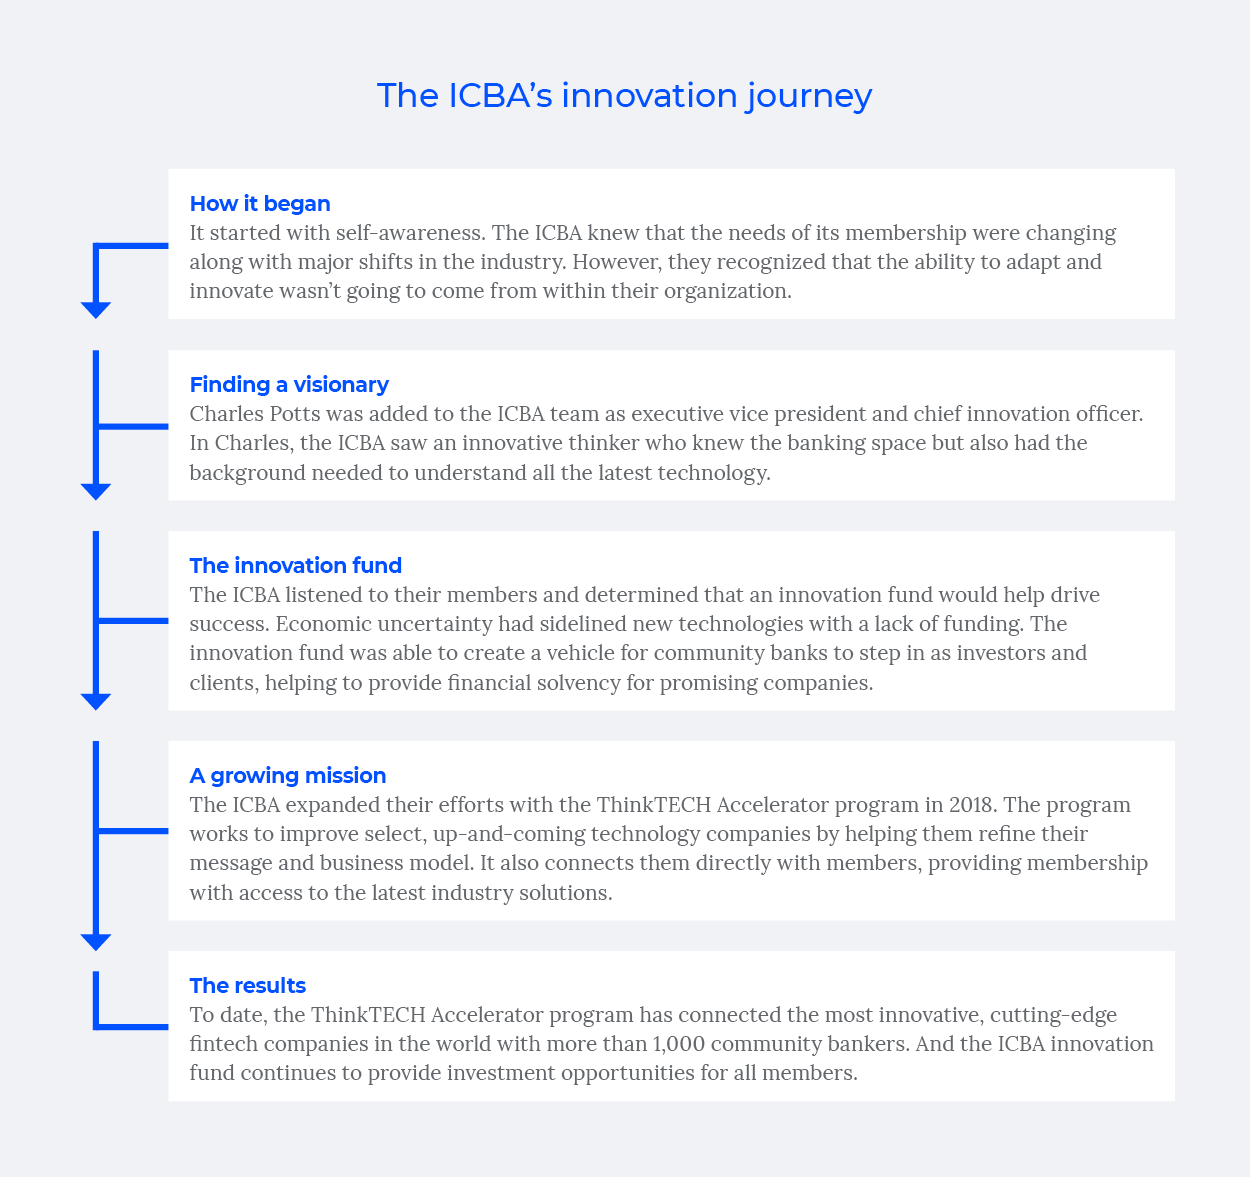 Table of the ICBA's Innovation journey